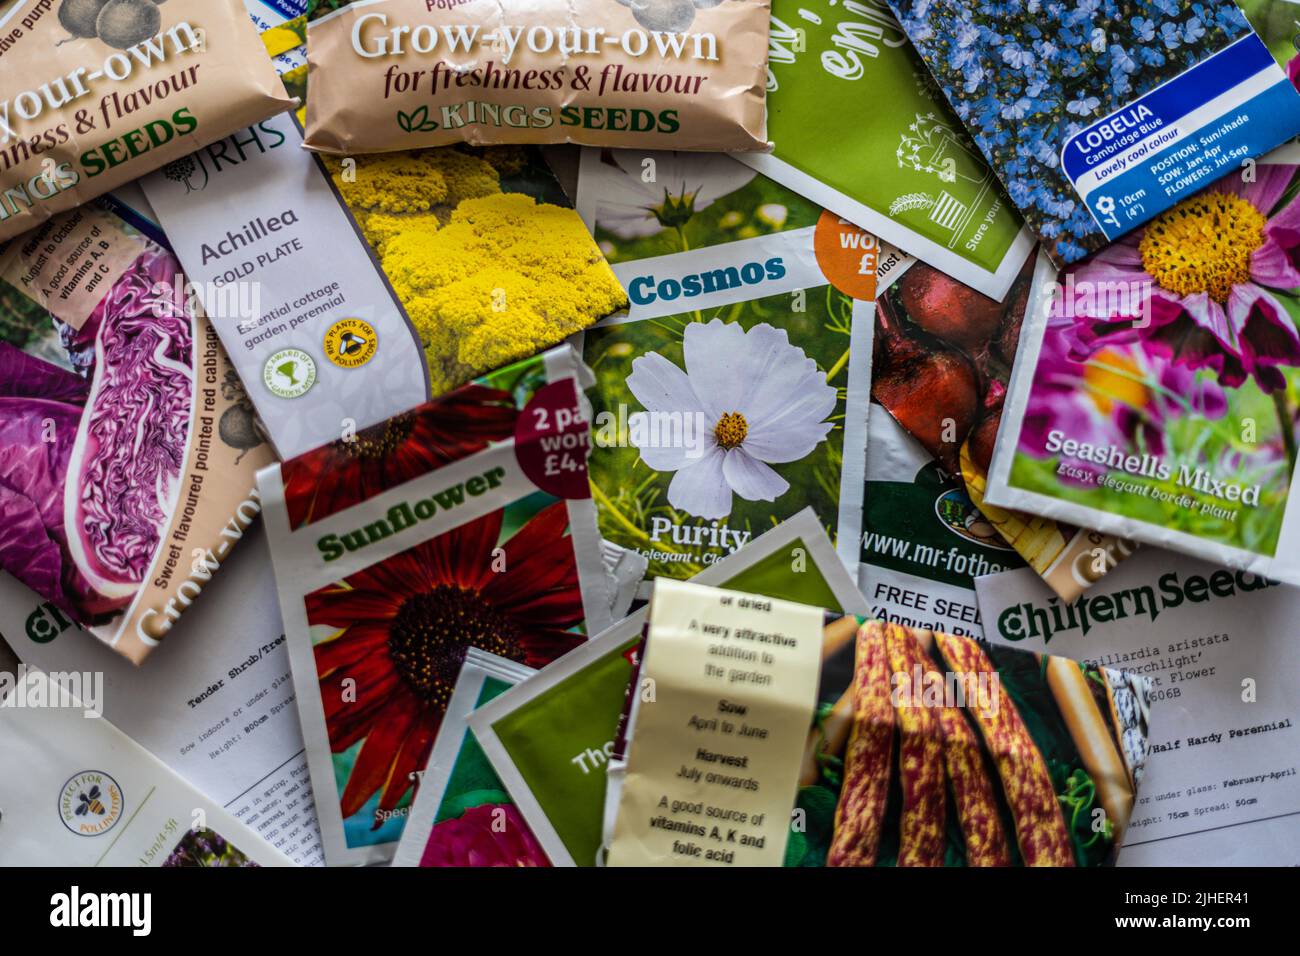 A random selection of seeds to be sown at home, Bristol. UK Stock Photo